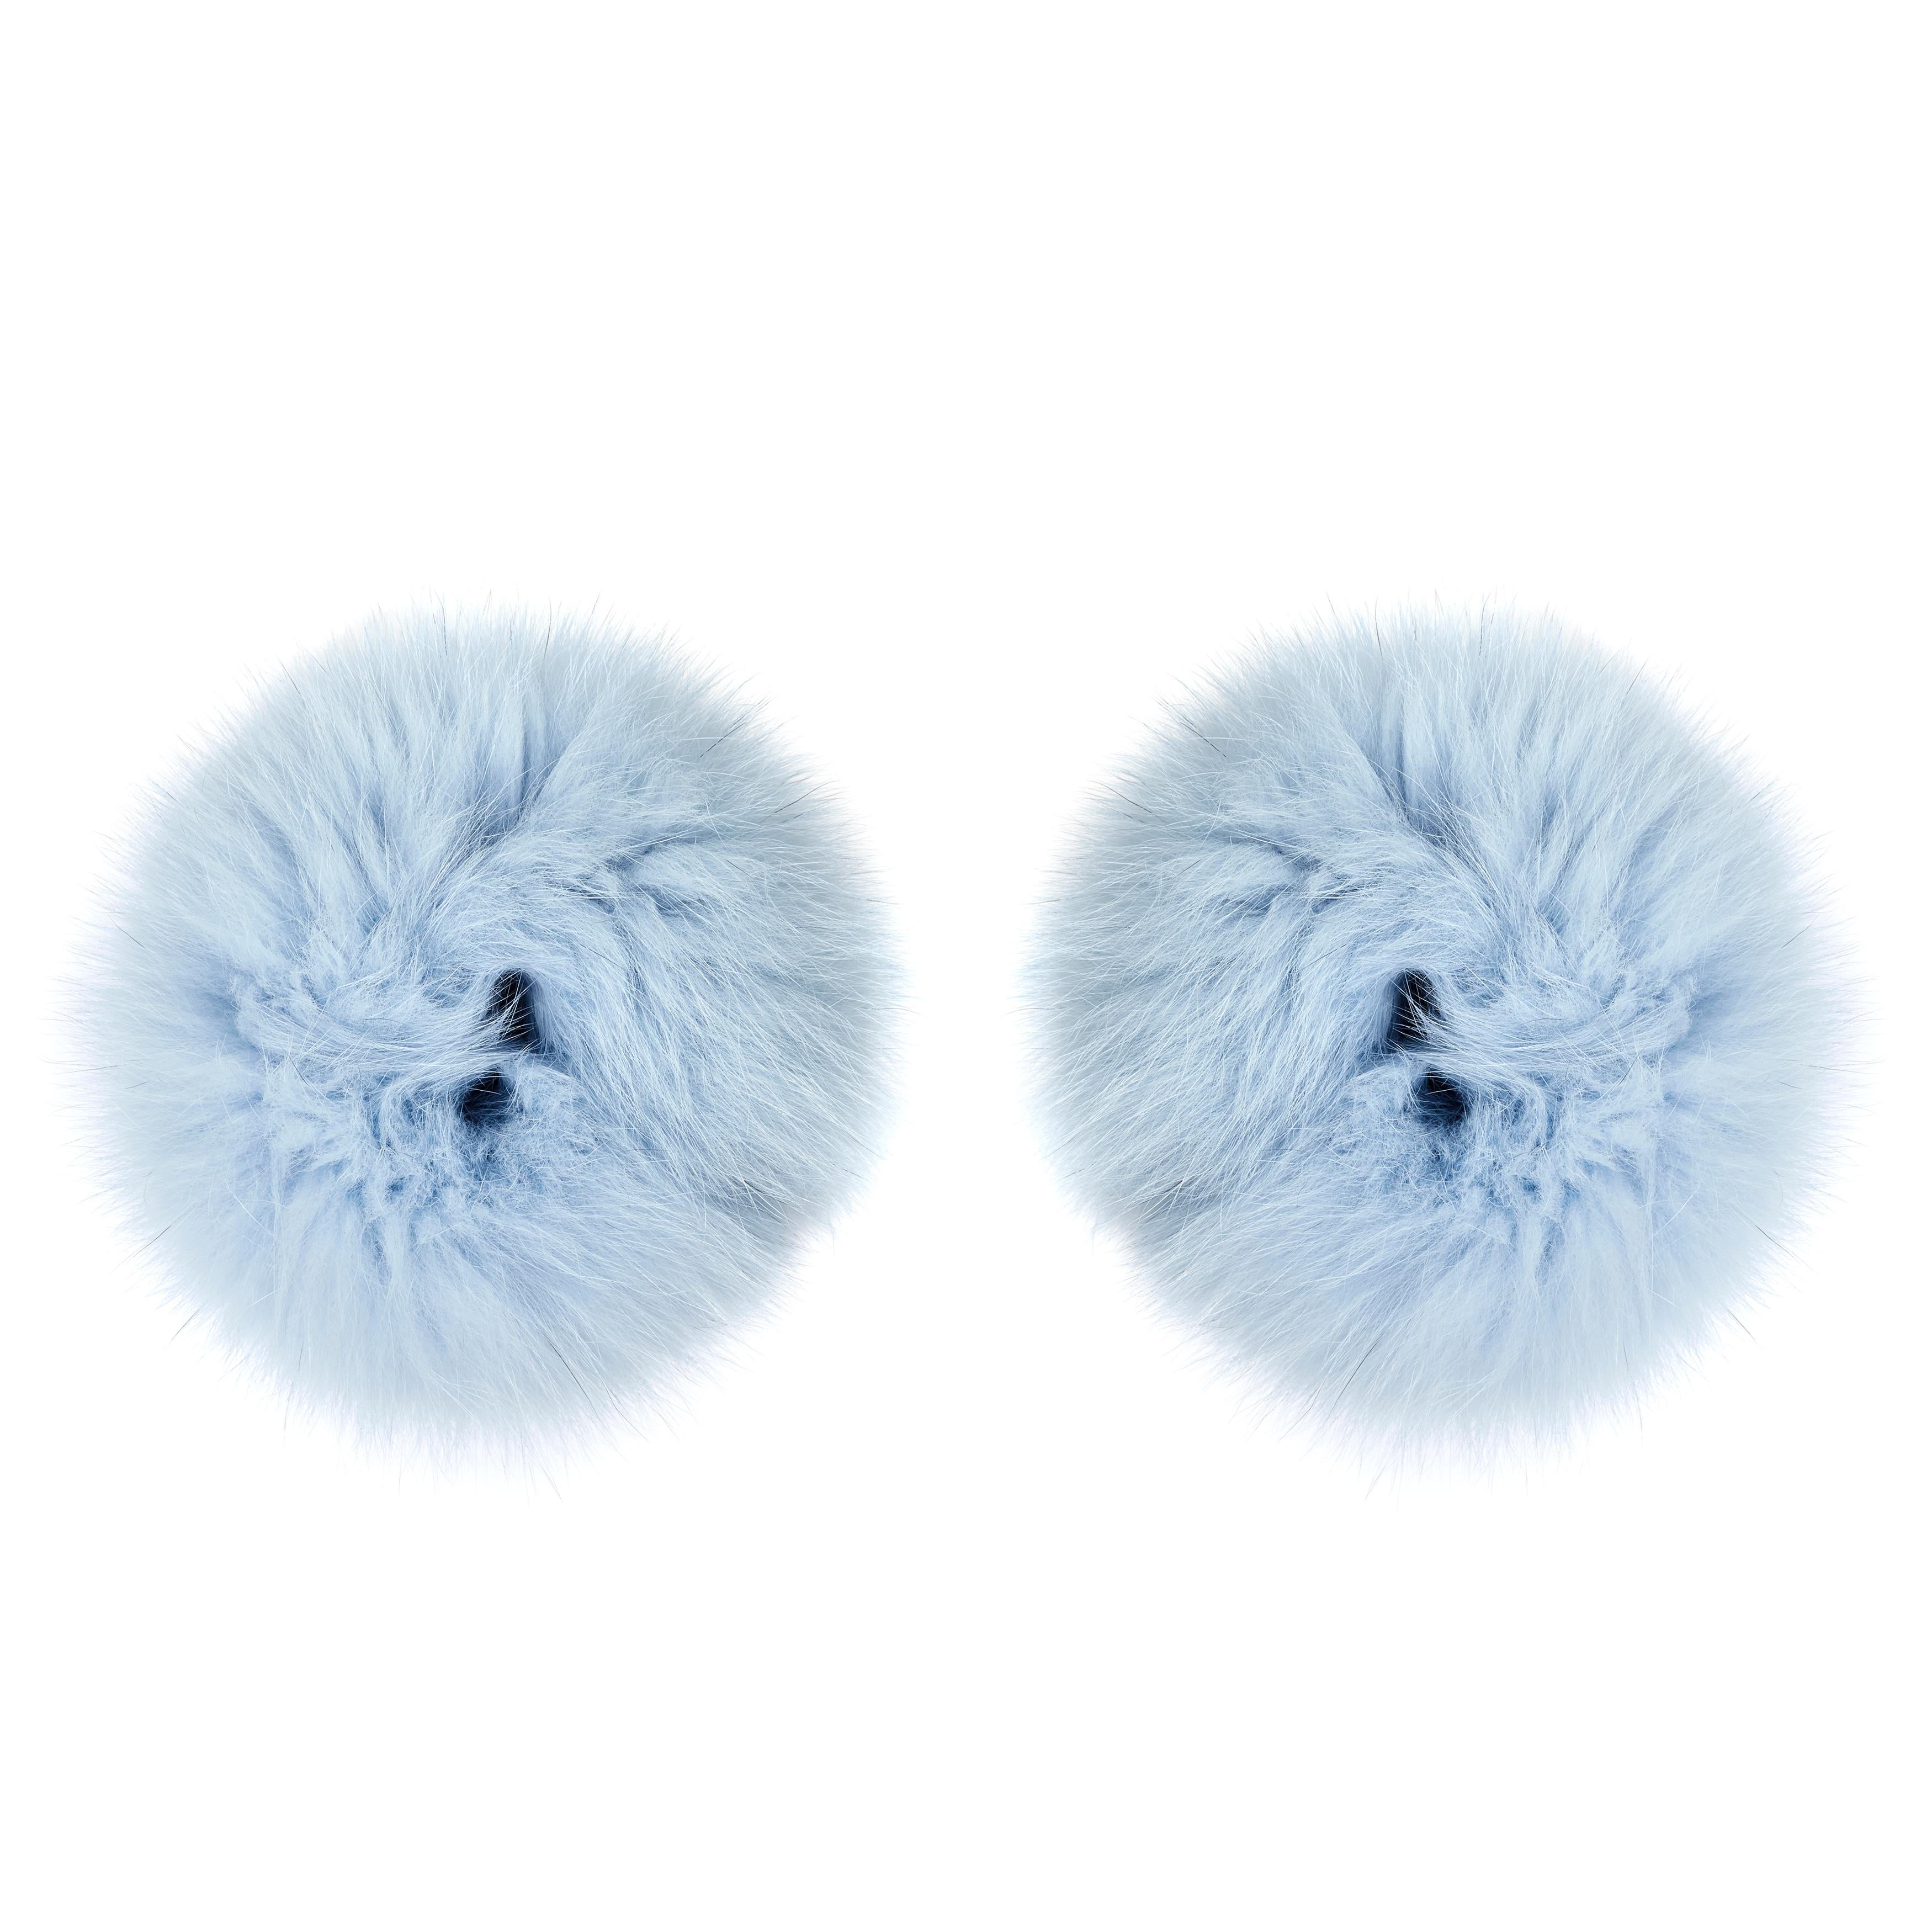 Verheyen London Large Pair of Snap on Fox Fur Cuffs in Ice Blue - Brand New 

Verheyen London Snap on Fox Cuffs are the perfect accessory for winter/autumn dressing. Wear over any jumper or coat, these cuffs will jazz up any look and keep you